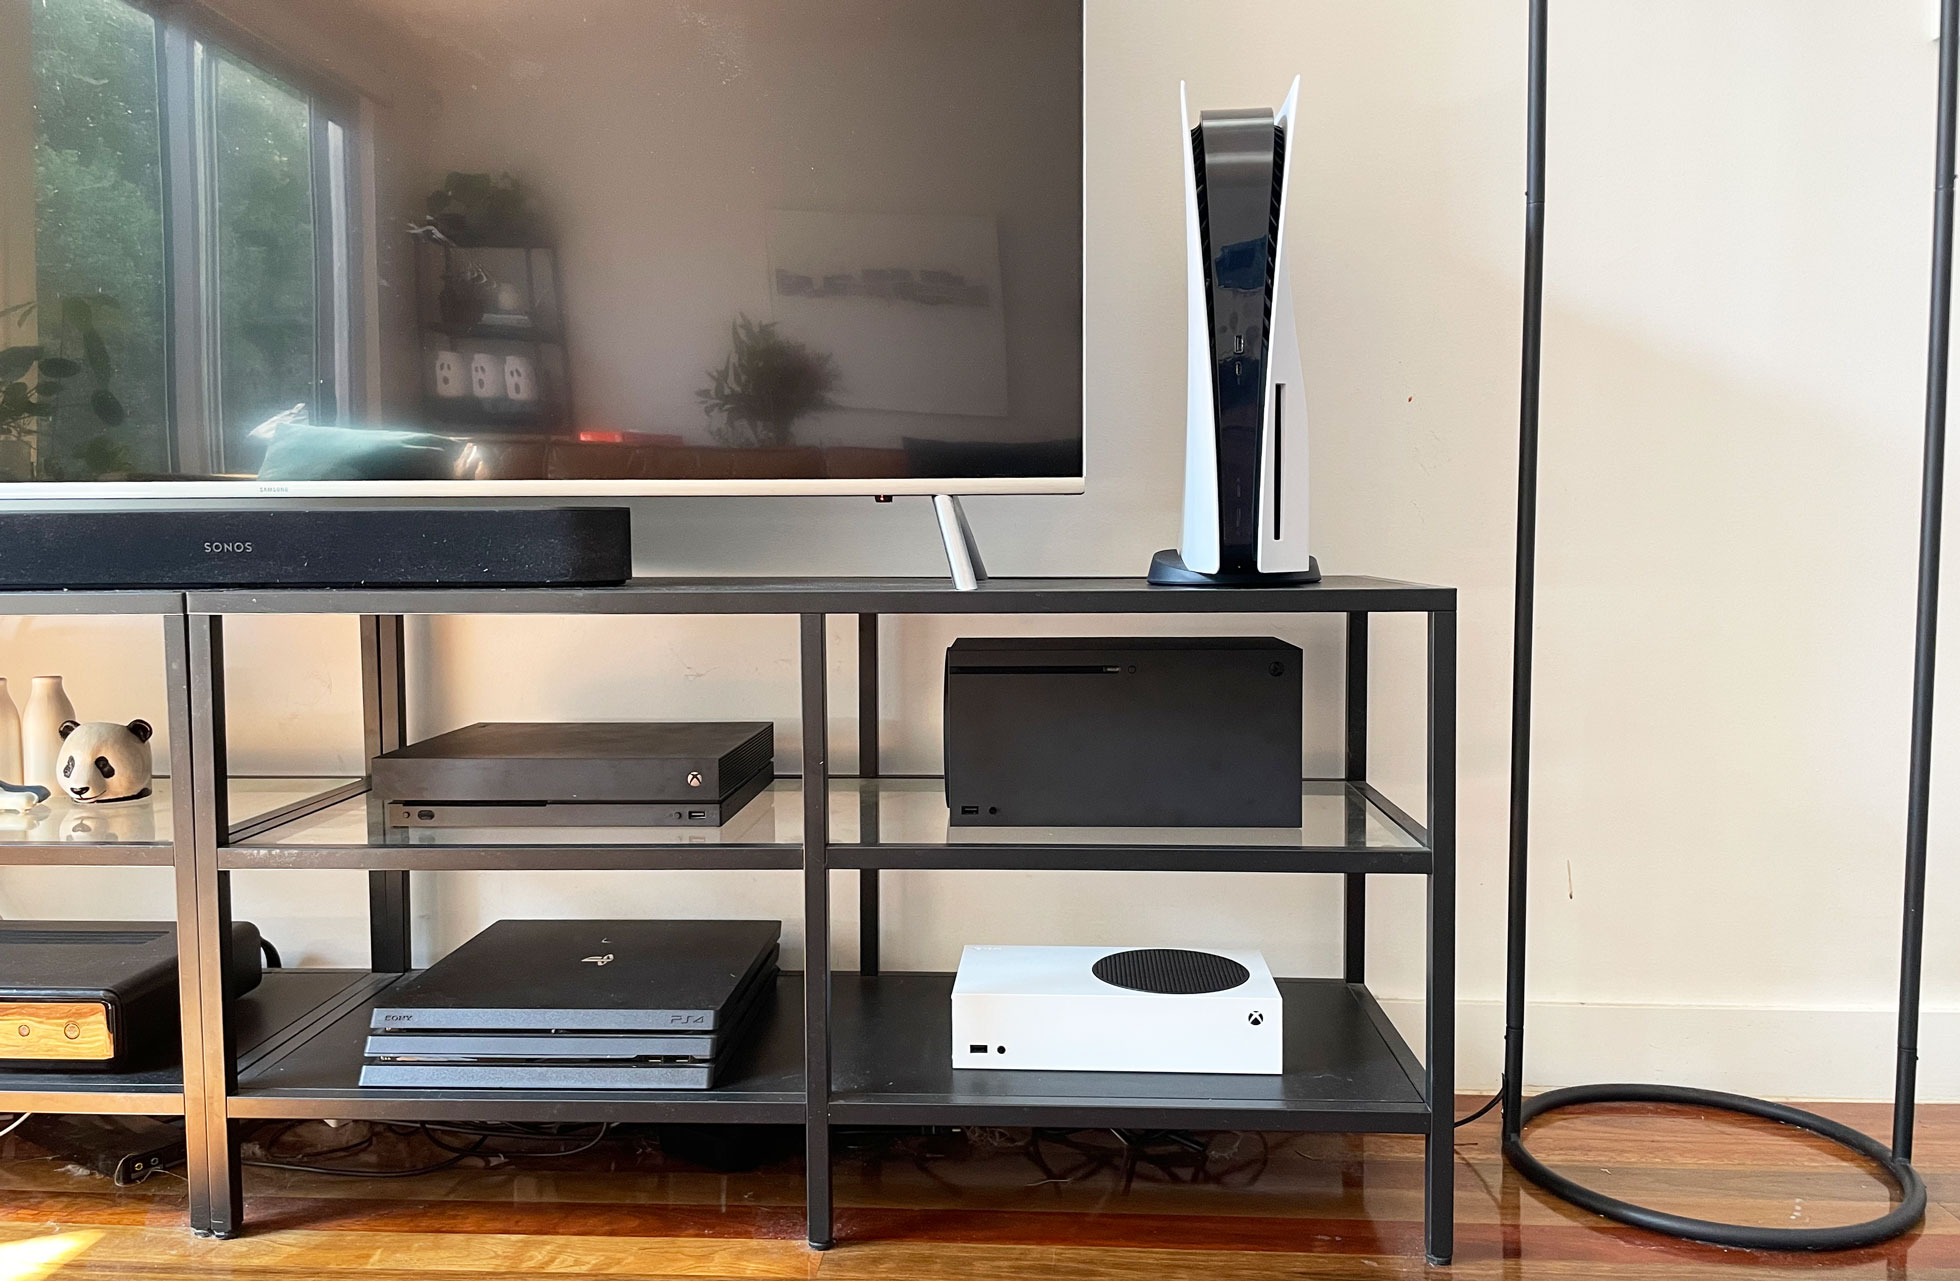 Here Is The Ps5 And Xbox Series X S Sitting In An Ikea Entertainment Unit In A Vertical Horizontal Orientation